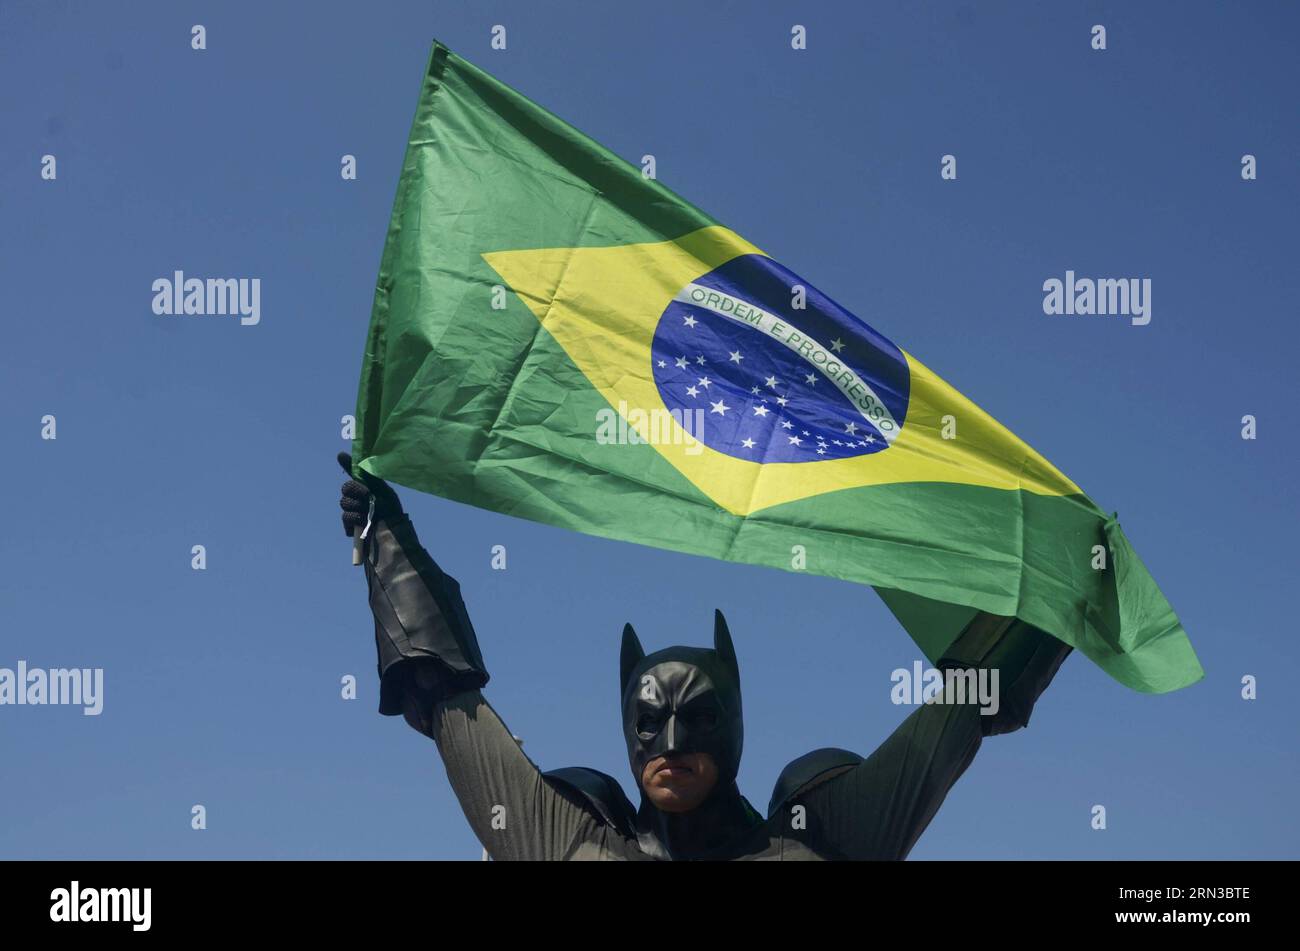 (150412) -- RIO DE JANEIRO, April 12, 2015 -- A man impersonating batman holds Brazil s national flag during a demonstration against the government of Brazilian President Dilma Rousseff after allegations of corruption in the state oil company Petrobras in Rio de Janeiro, Brazil, on April 12, 2015. Marcelo Fonseca/AGENCIA ESTADO) (jp) BRAZIL OUT BRAZIL-SAO PAULO-SOCIETY-DEMOSTRATION e AE PUBLICATIONxNOTxINxCHN   Rio de Janeiro April 12 2015 a Man impersonating Batman holds Brazil S National Flag during a Demonstration against The Government of Brazilian President Dilma Rousseff After allegation Stock Photo